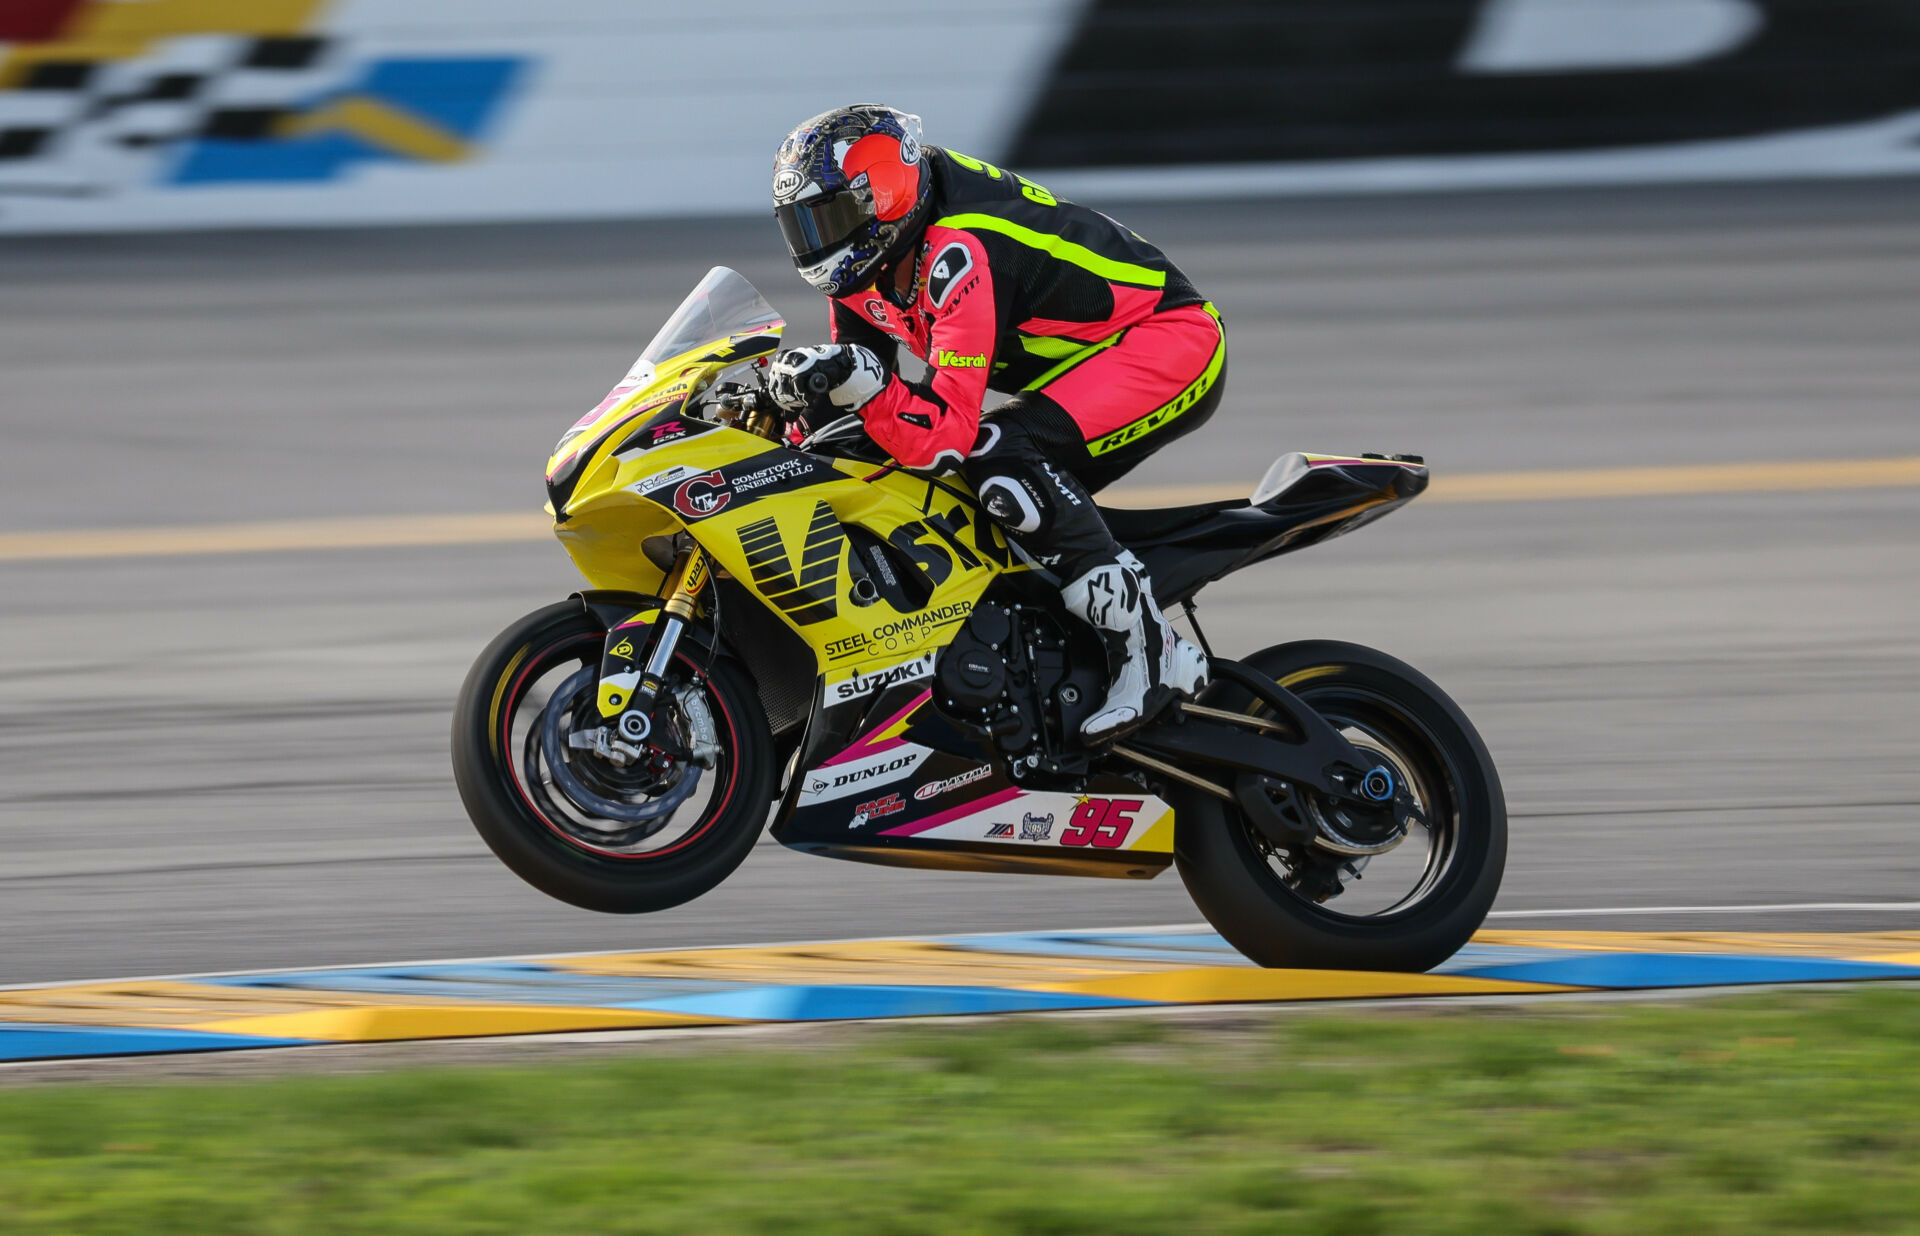 Hayden Gillim (95) at speed on his Vesrah Racing Suzuki GSX-R750. Photo by Brian J. Nelson, courtesy Vesrah Racing.